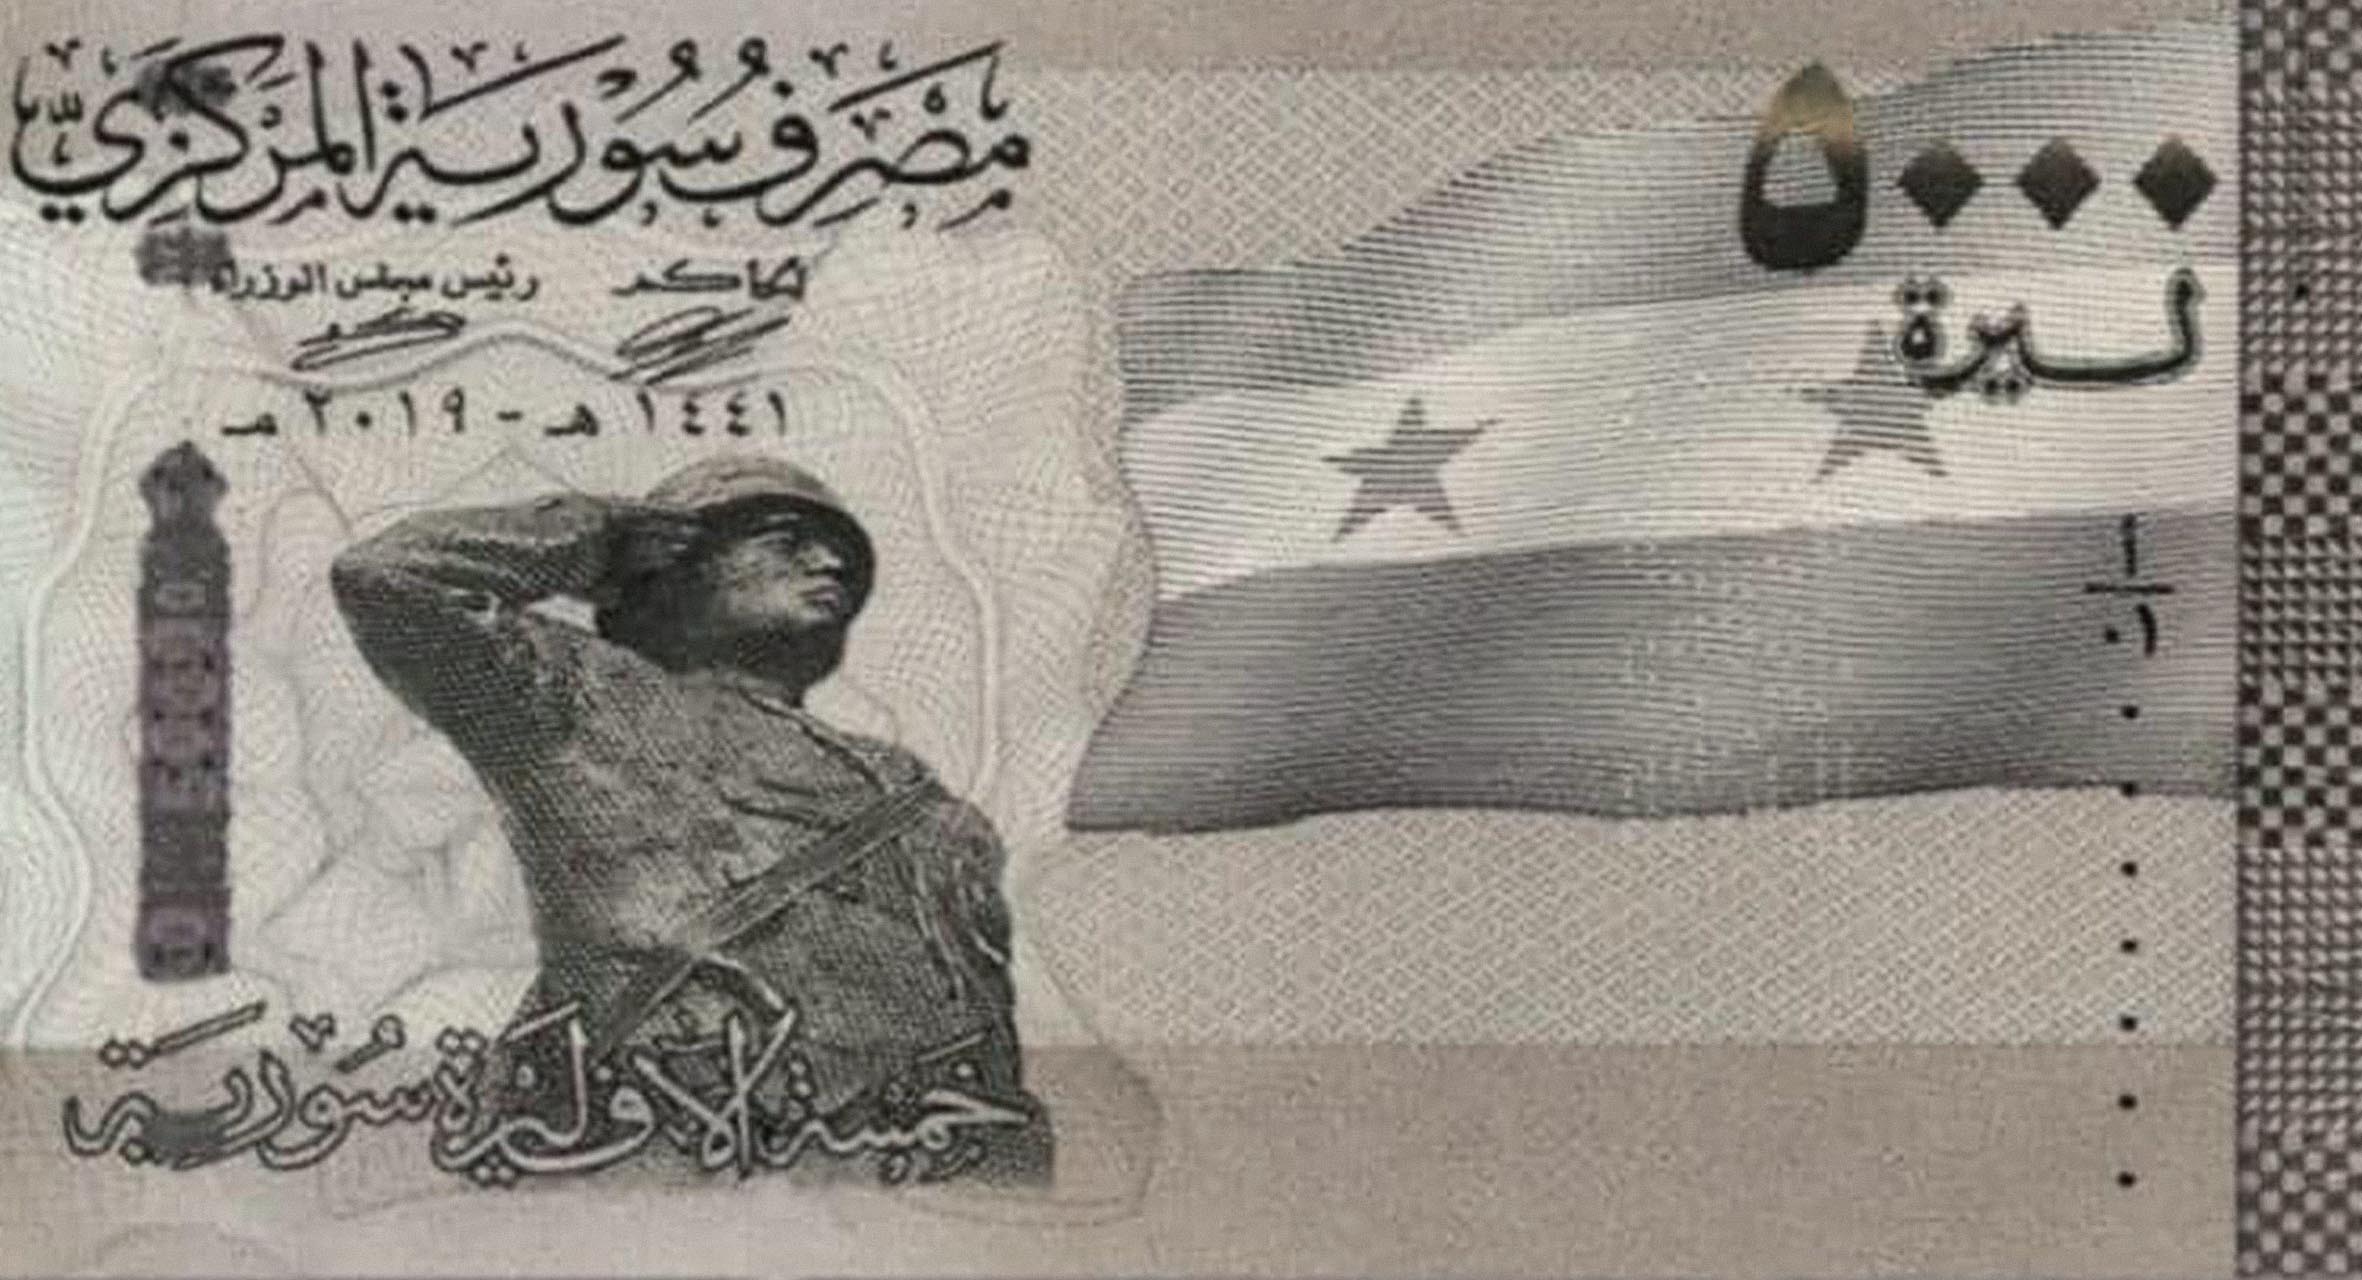 Syria Central Bank to ease burden of carrying many small, worthless banknotes by issuing a larger, worthless one image